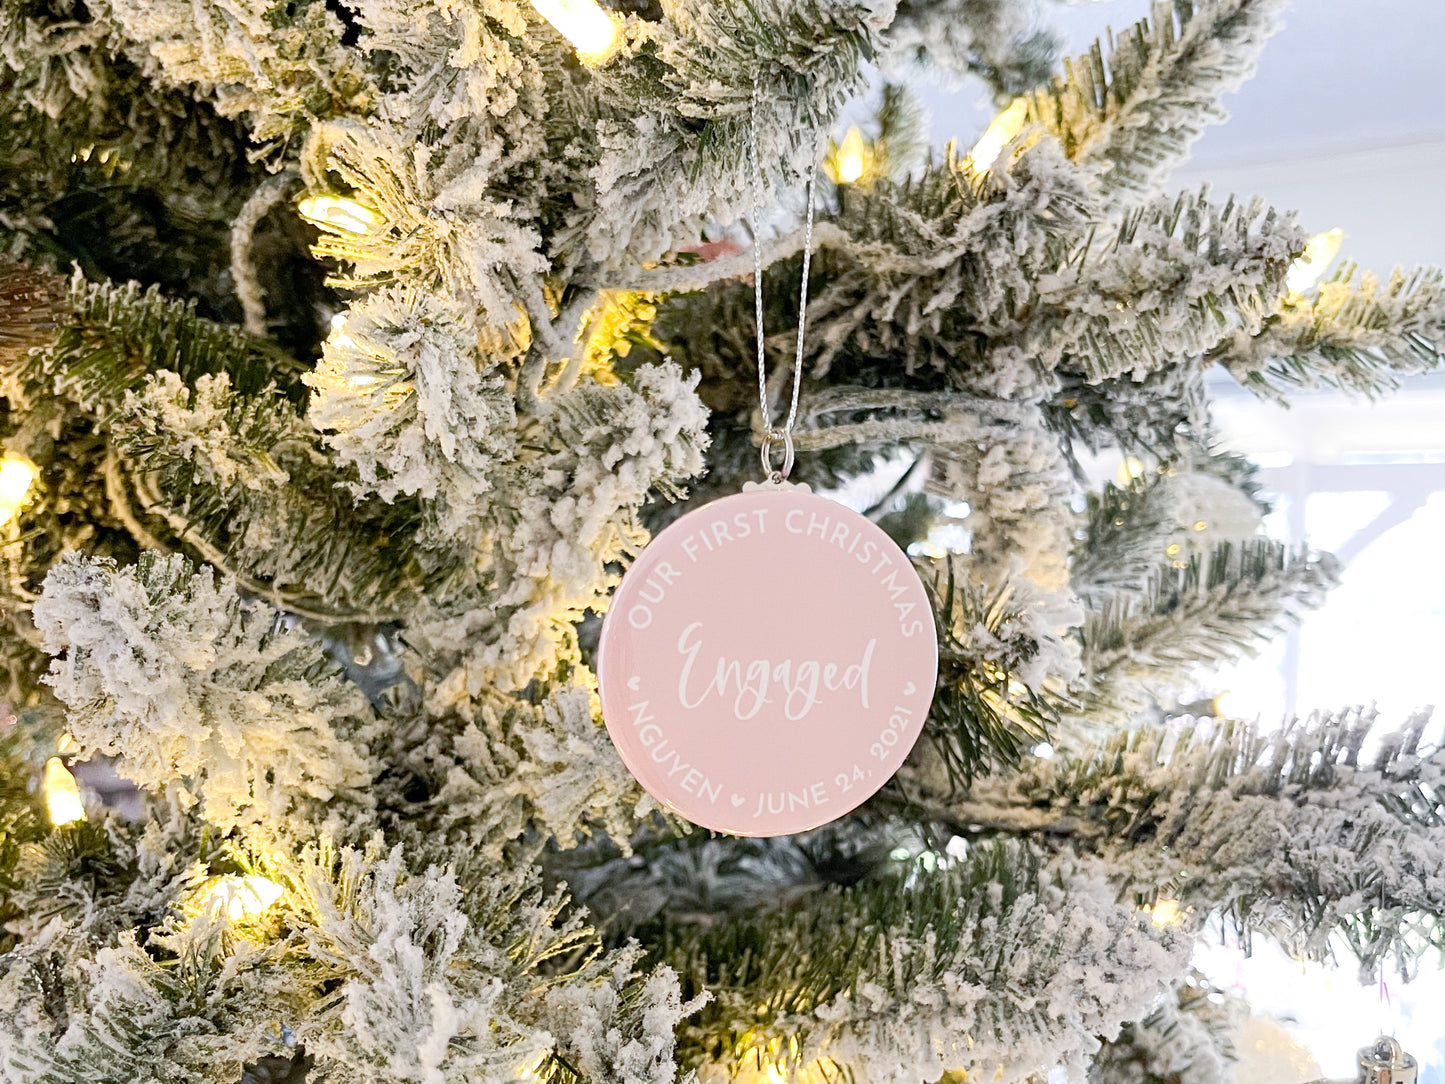 Our First Christmas Engaged Ornaments